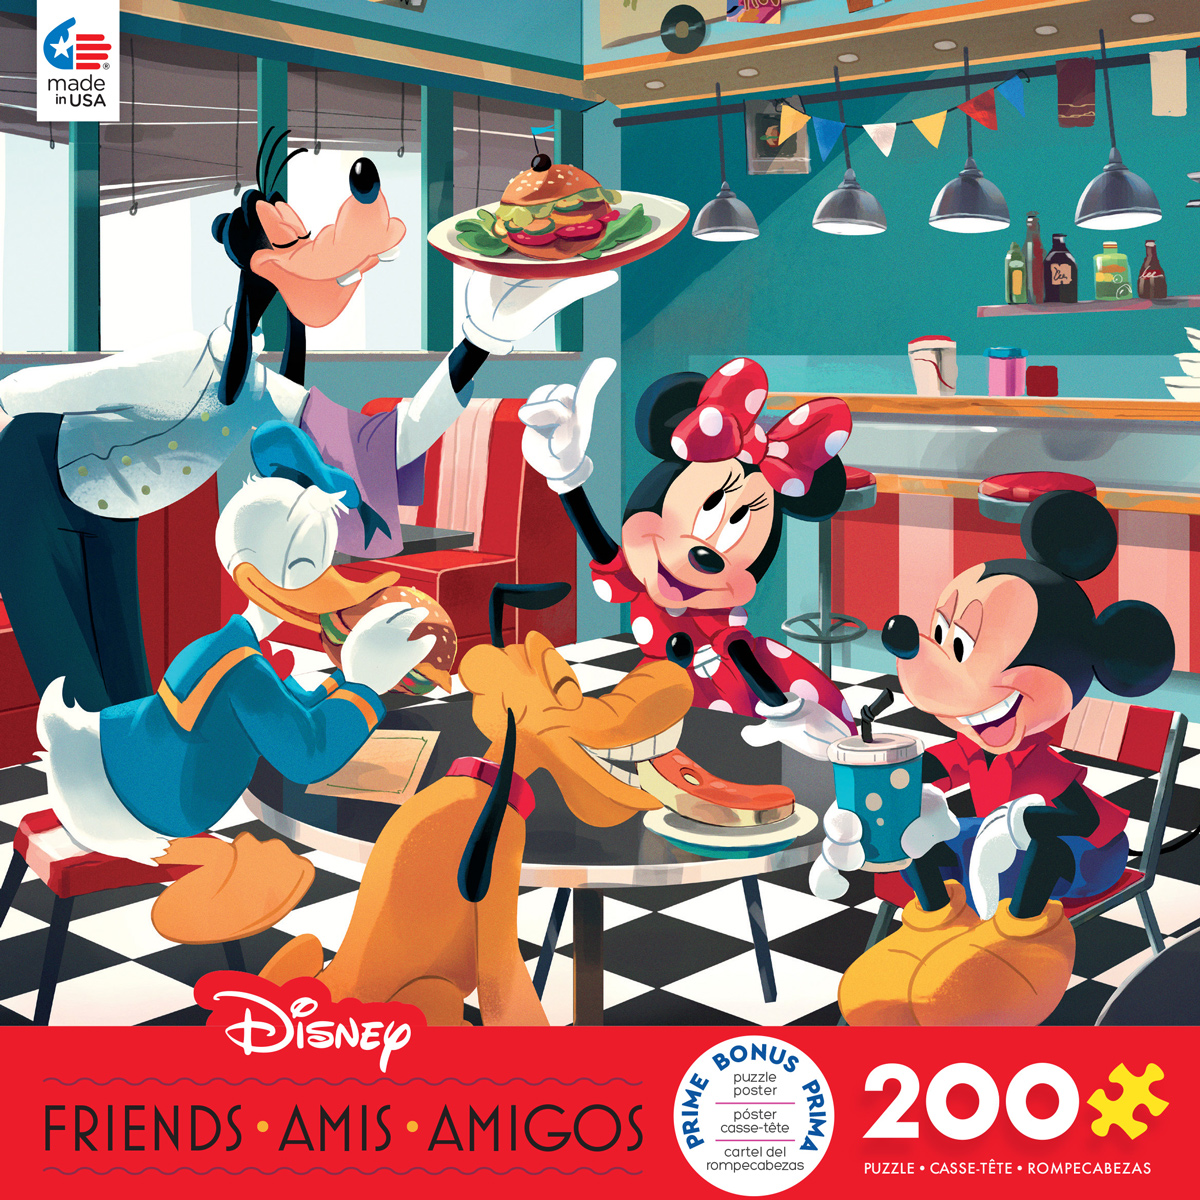 Disney Fine Art Puzzle 1000 Piece By Ceaco Mickey Pluto Donald Duck Made In USA 